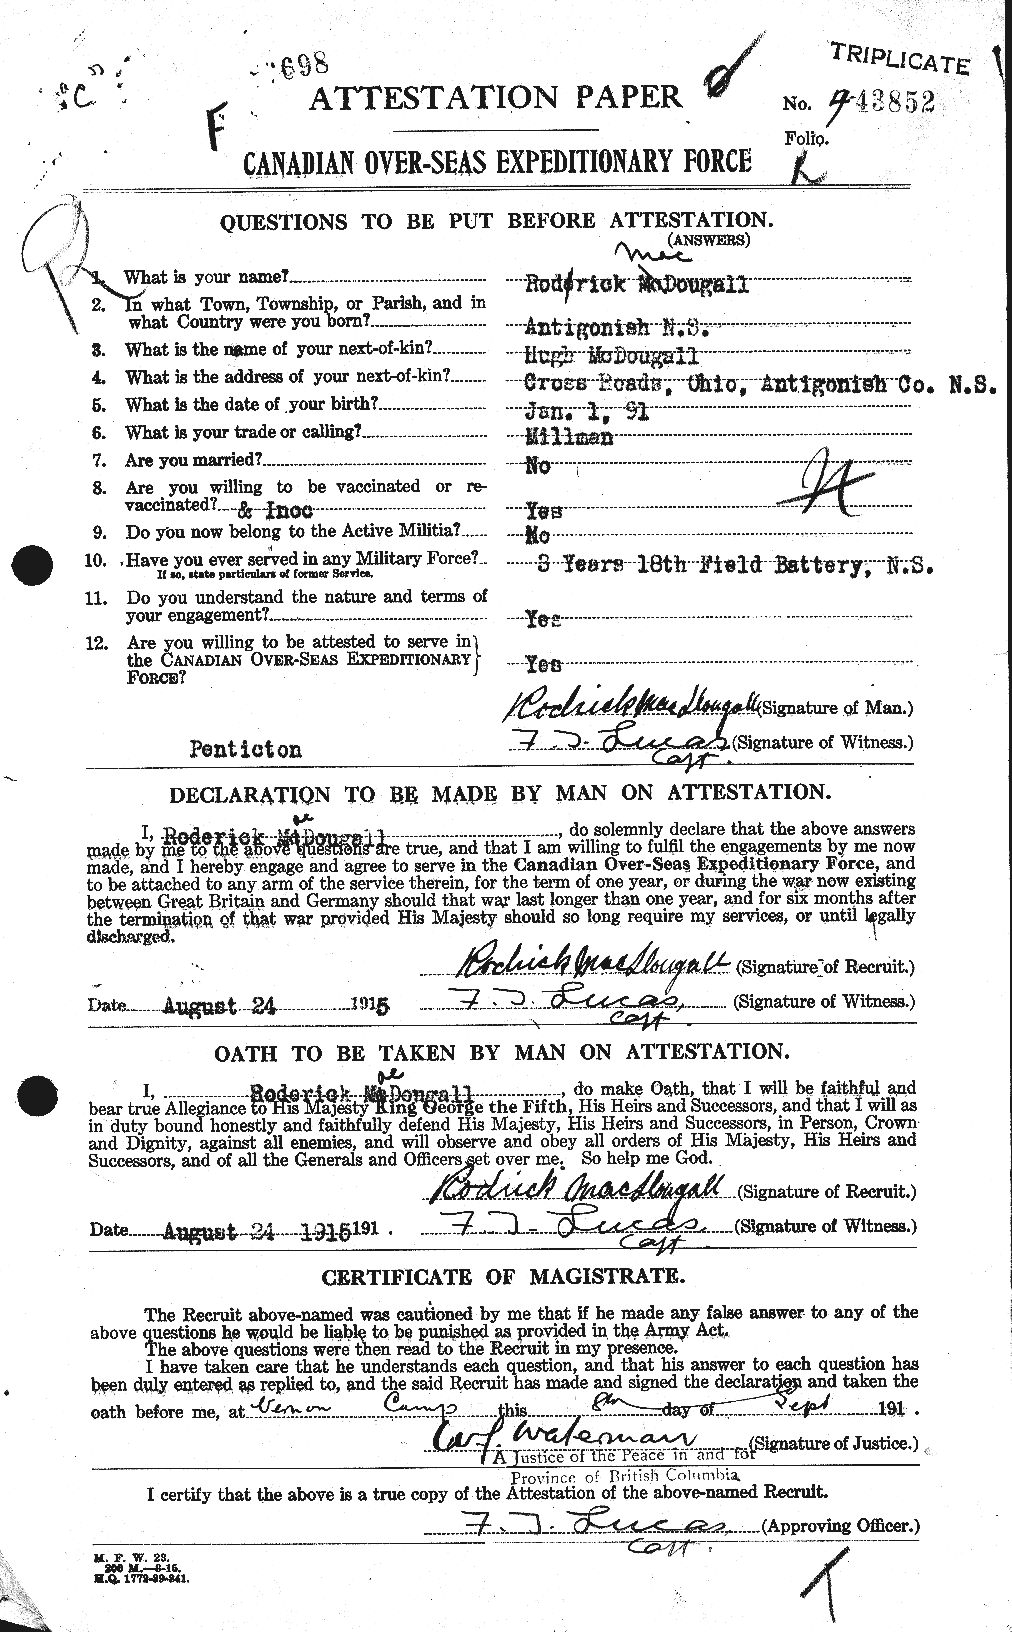 Personnel Records of the First World War - CEF 518380a